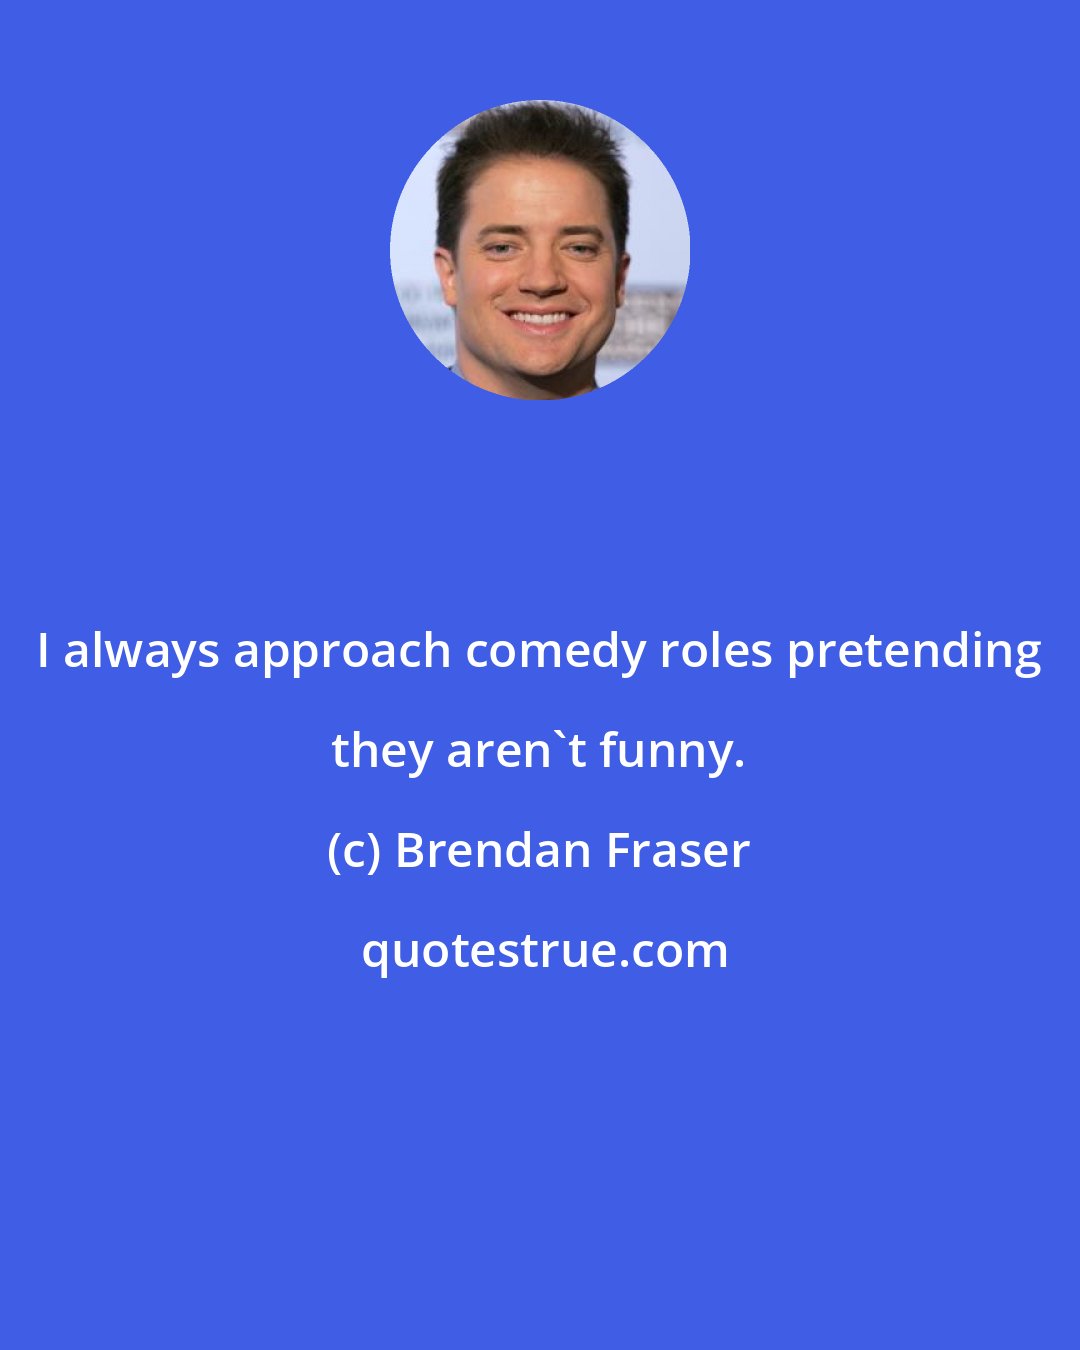 Brendan Fraser: I always approach comedy roles pretending they aren't funny.